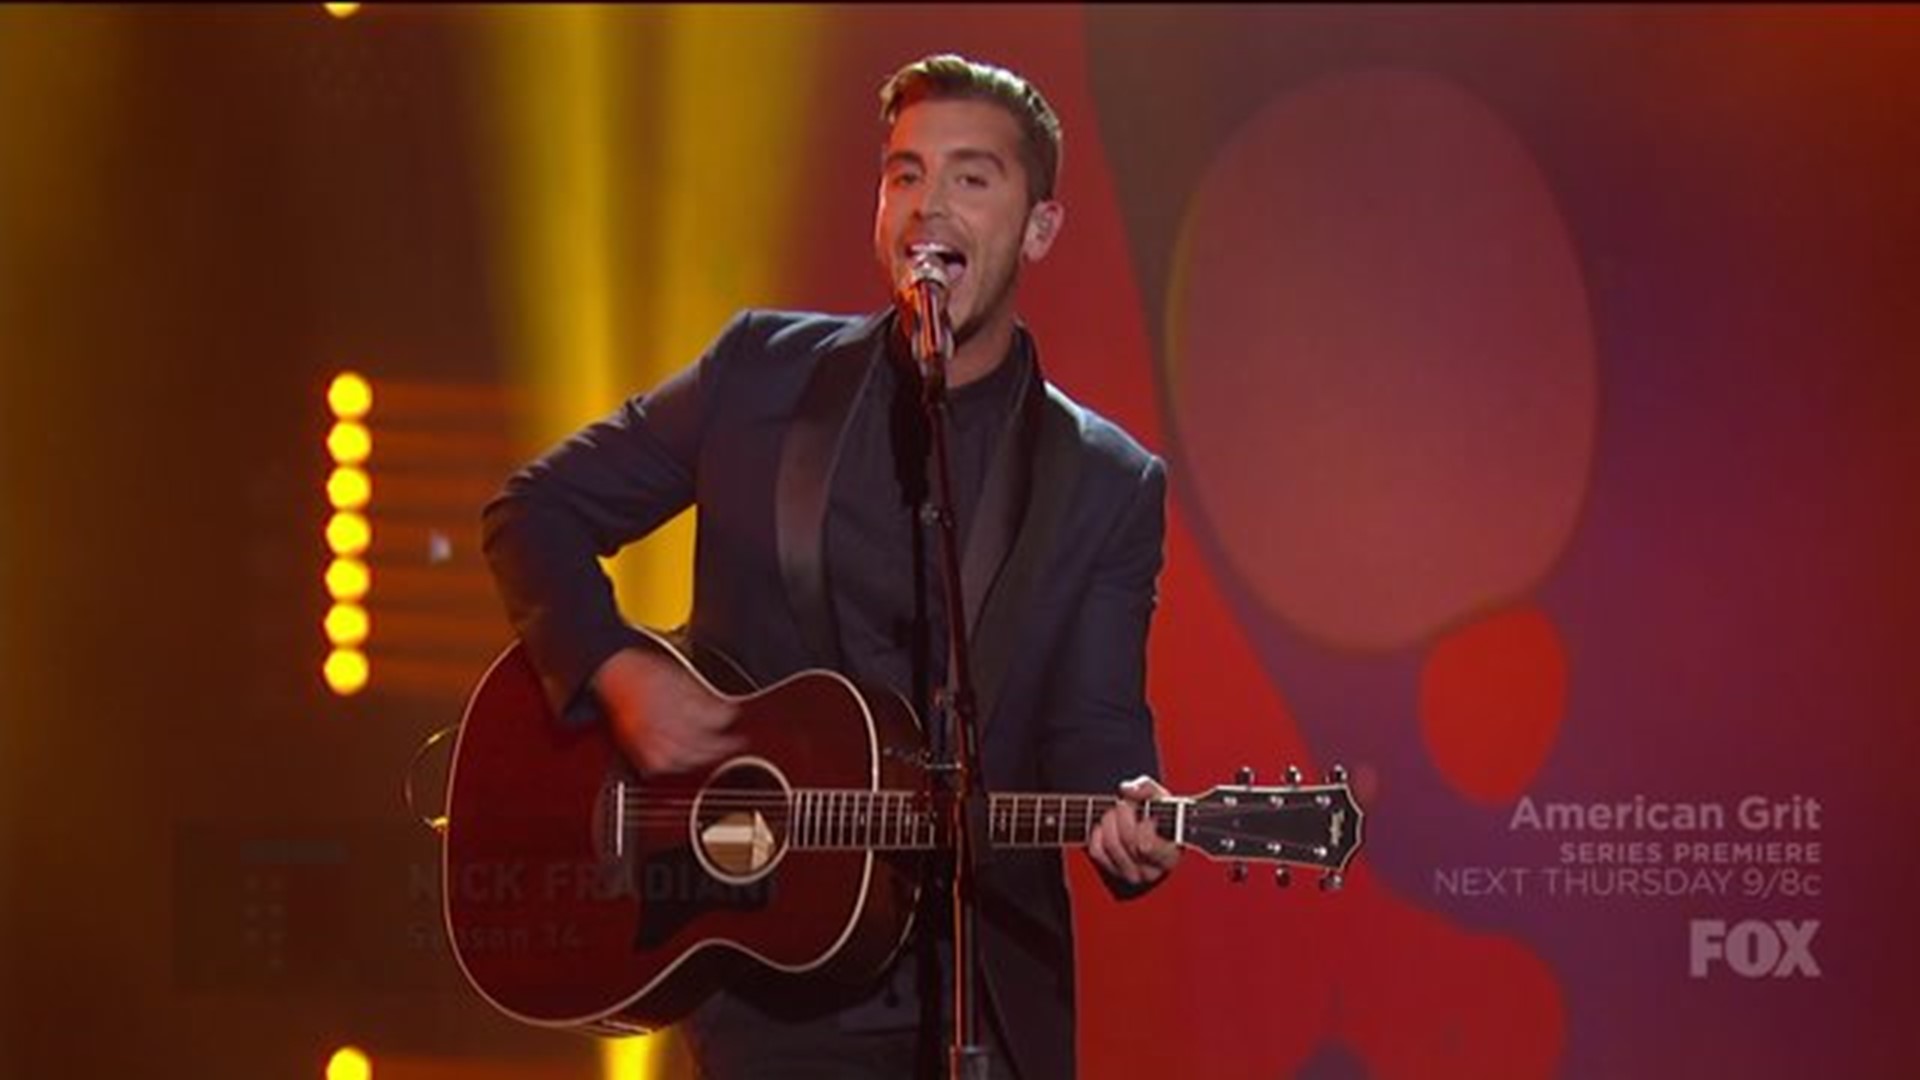 Nick Fradiani pays tribute to David Bowie with other Idol winners